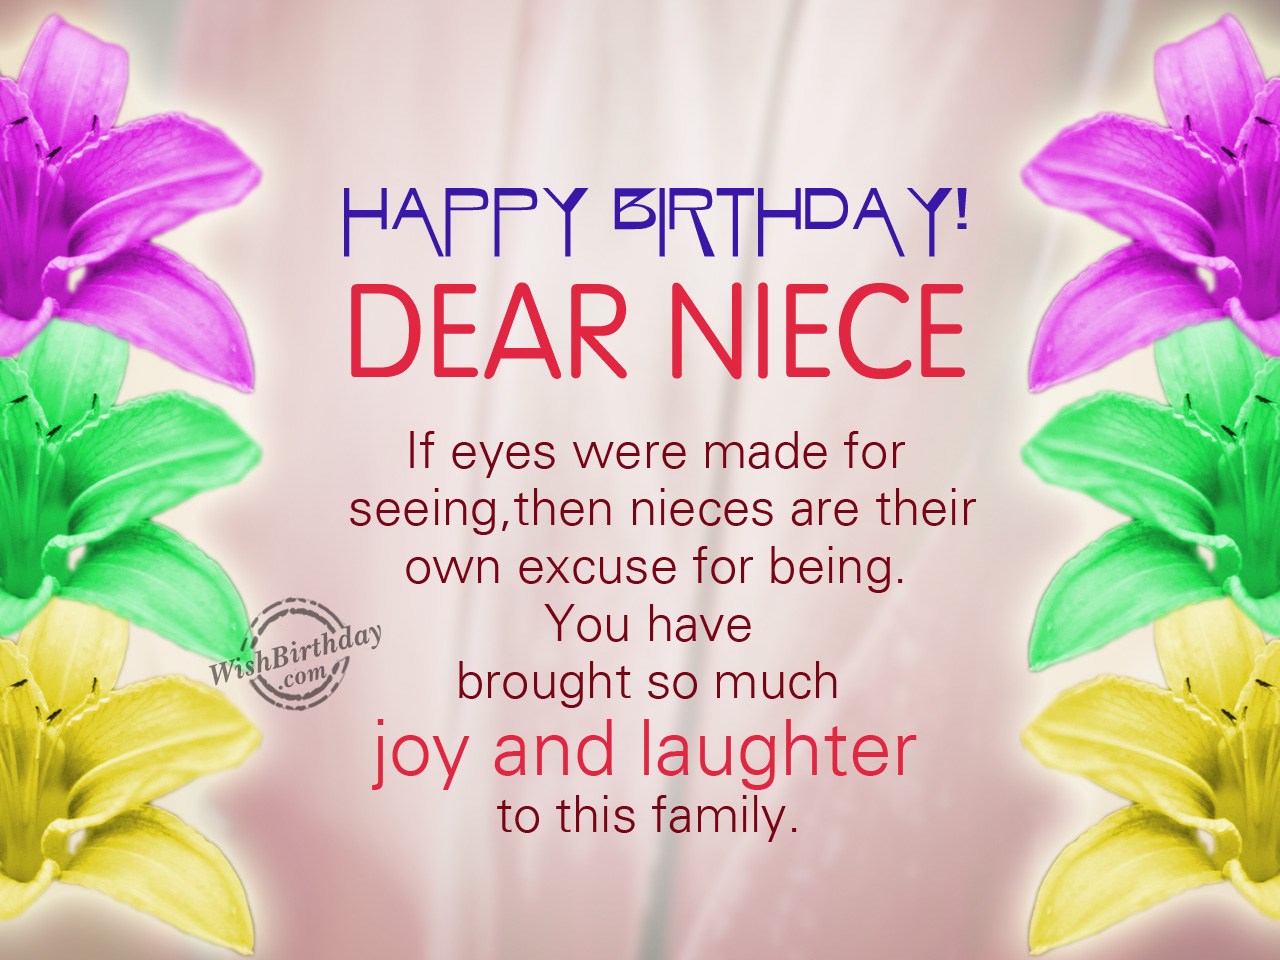 Birthday Wishes For Niece - Birthday Images, Pictures With tenor, maker of gif keyboard, add popular happy birthday niece animated gifs to your conversations.